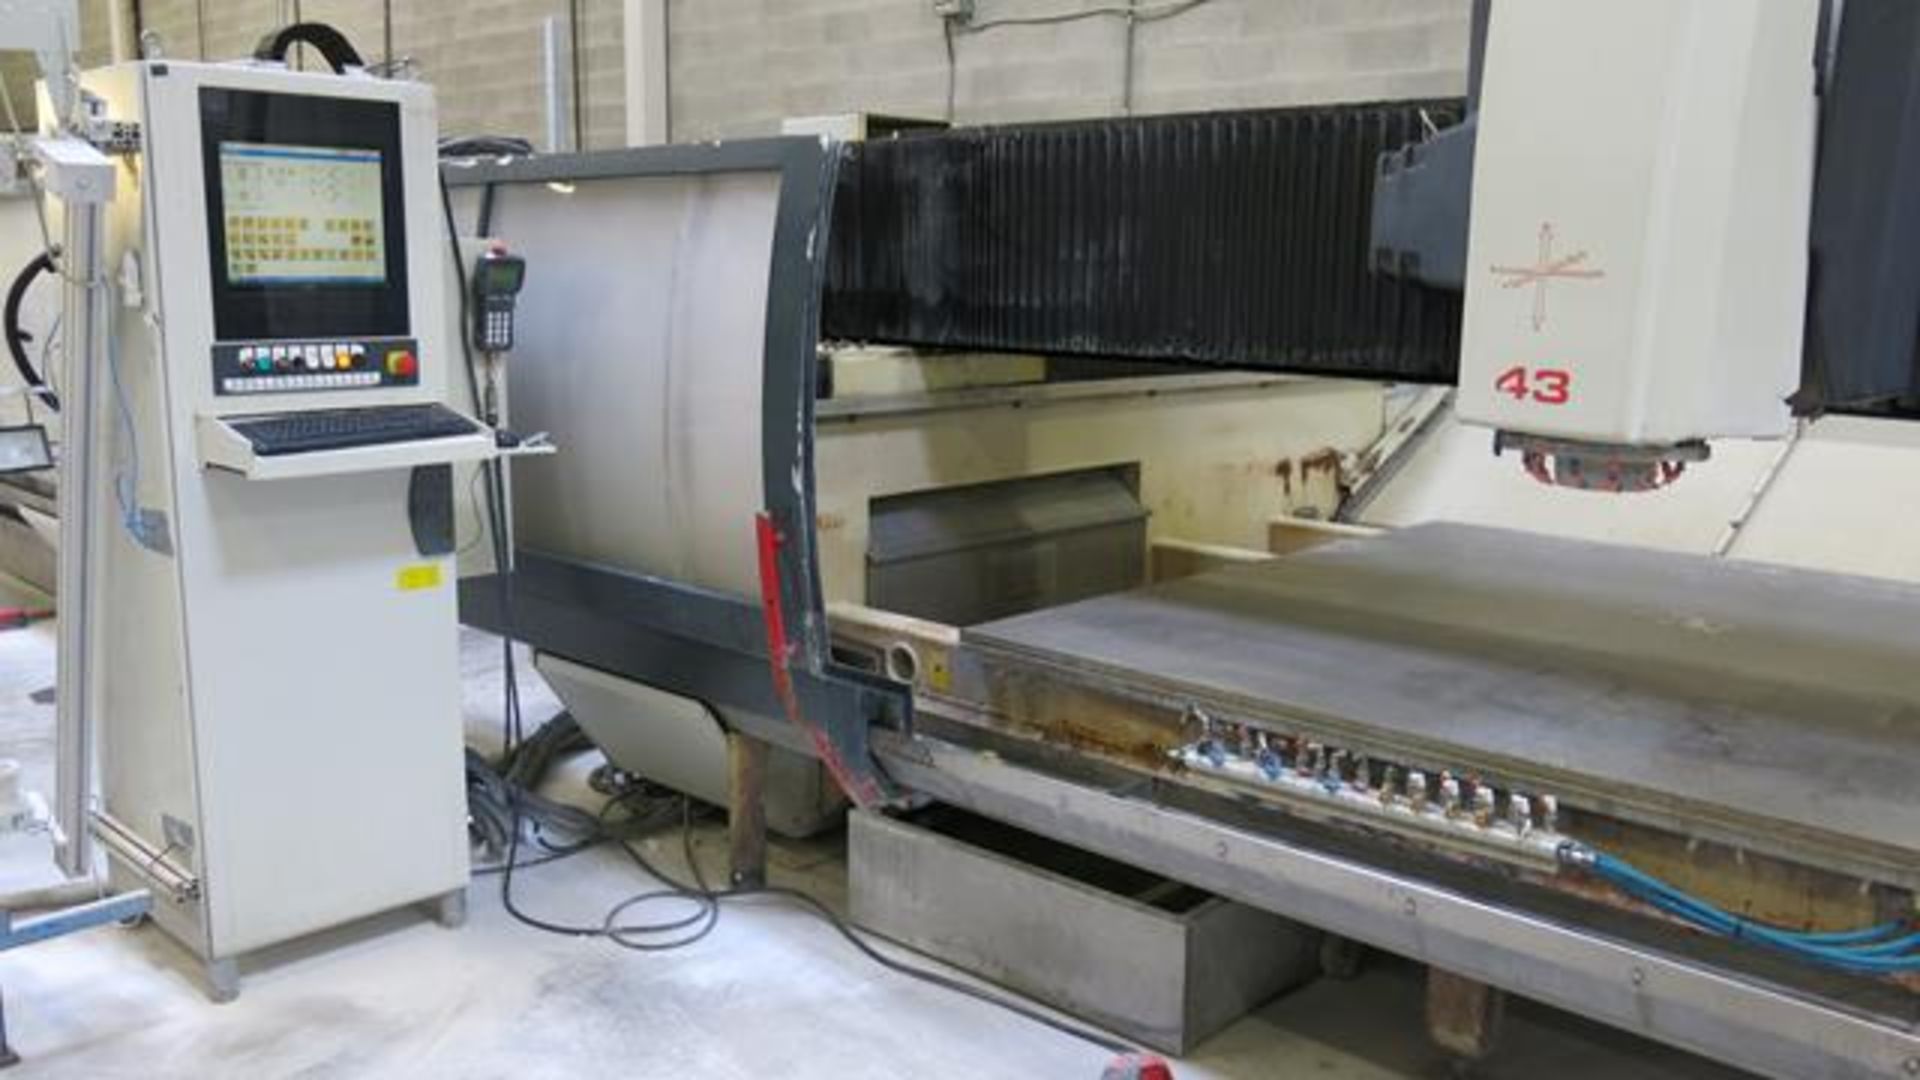 INTERMAC, MASTER 43 STANDARD, CNC STONE AND GLASS MACHINING CENTRE, TABLE SIZE 4060 MM X 2300 MM, - Image 4 of 7